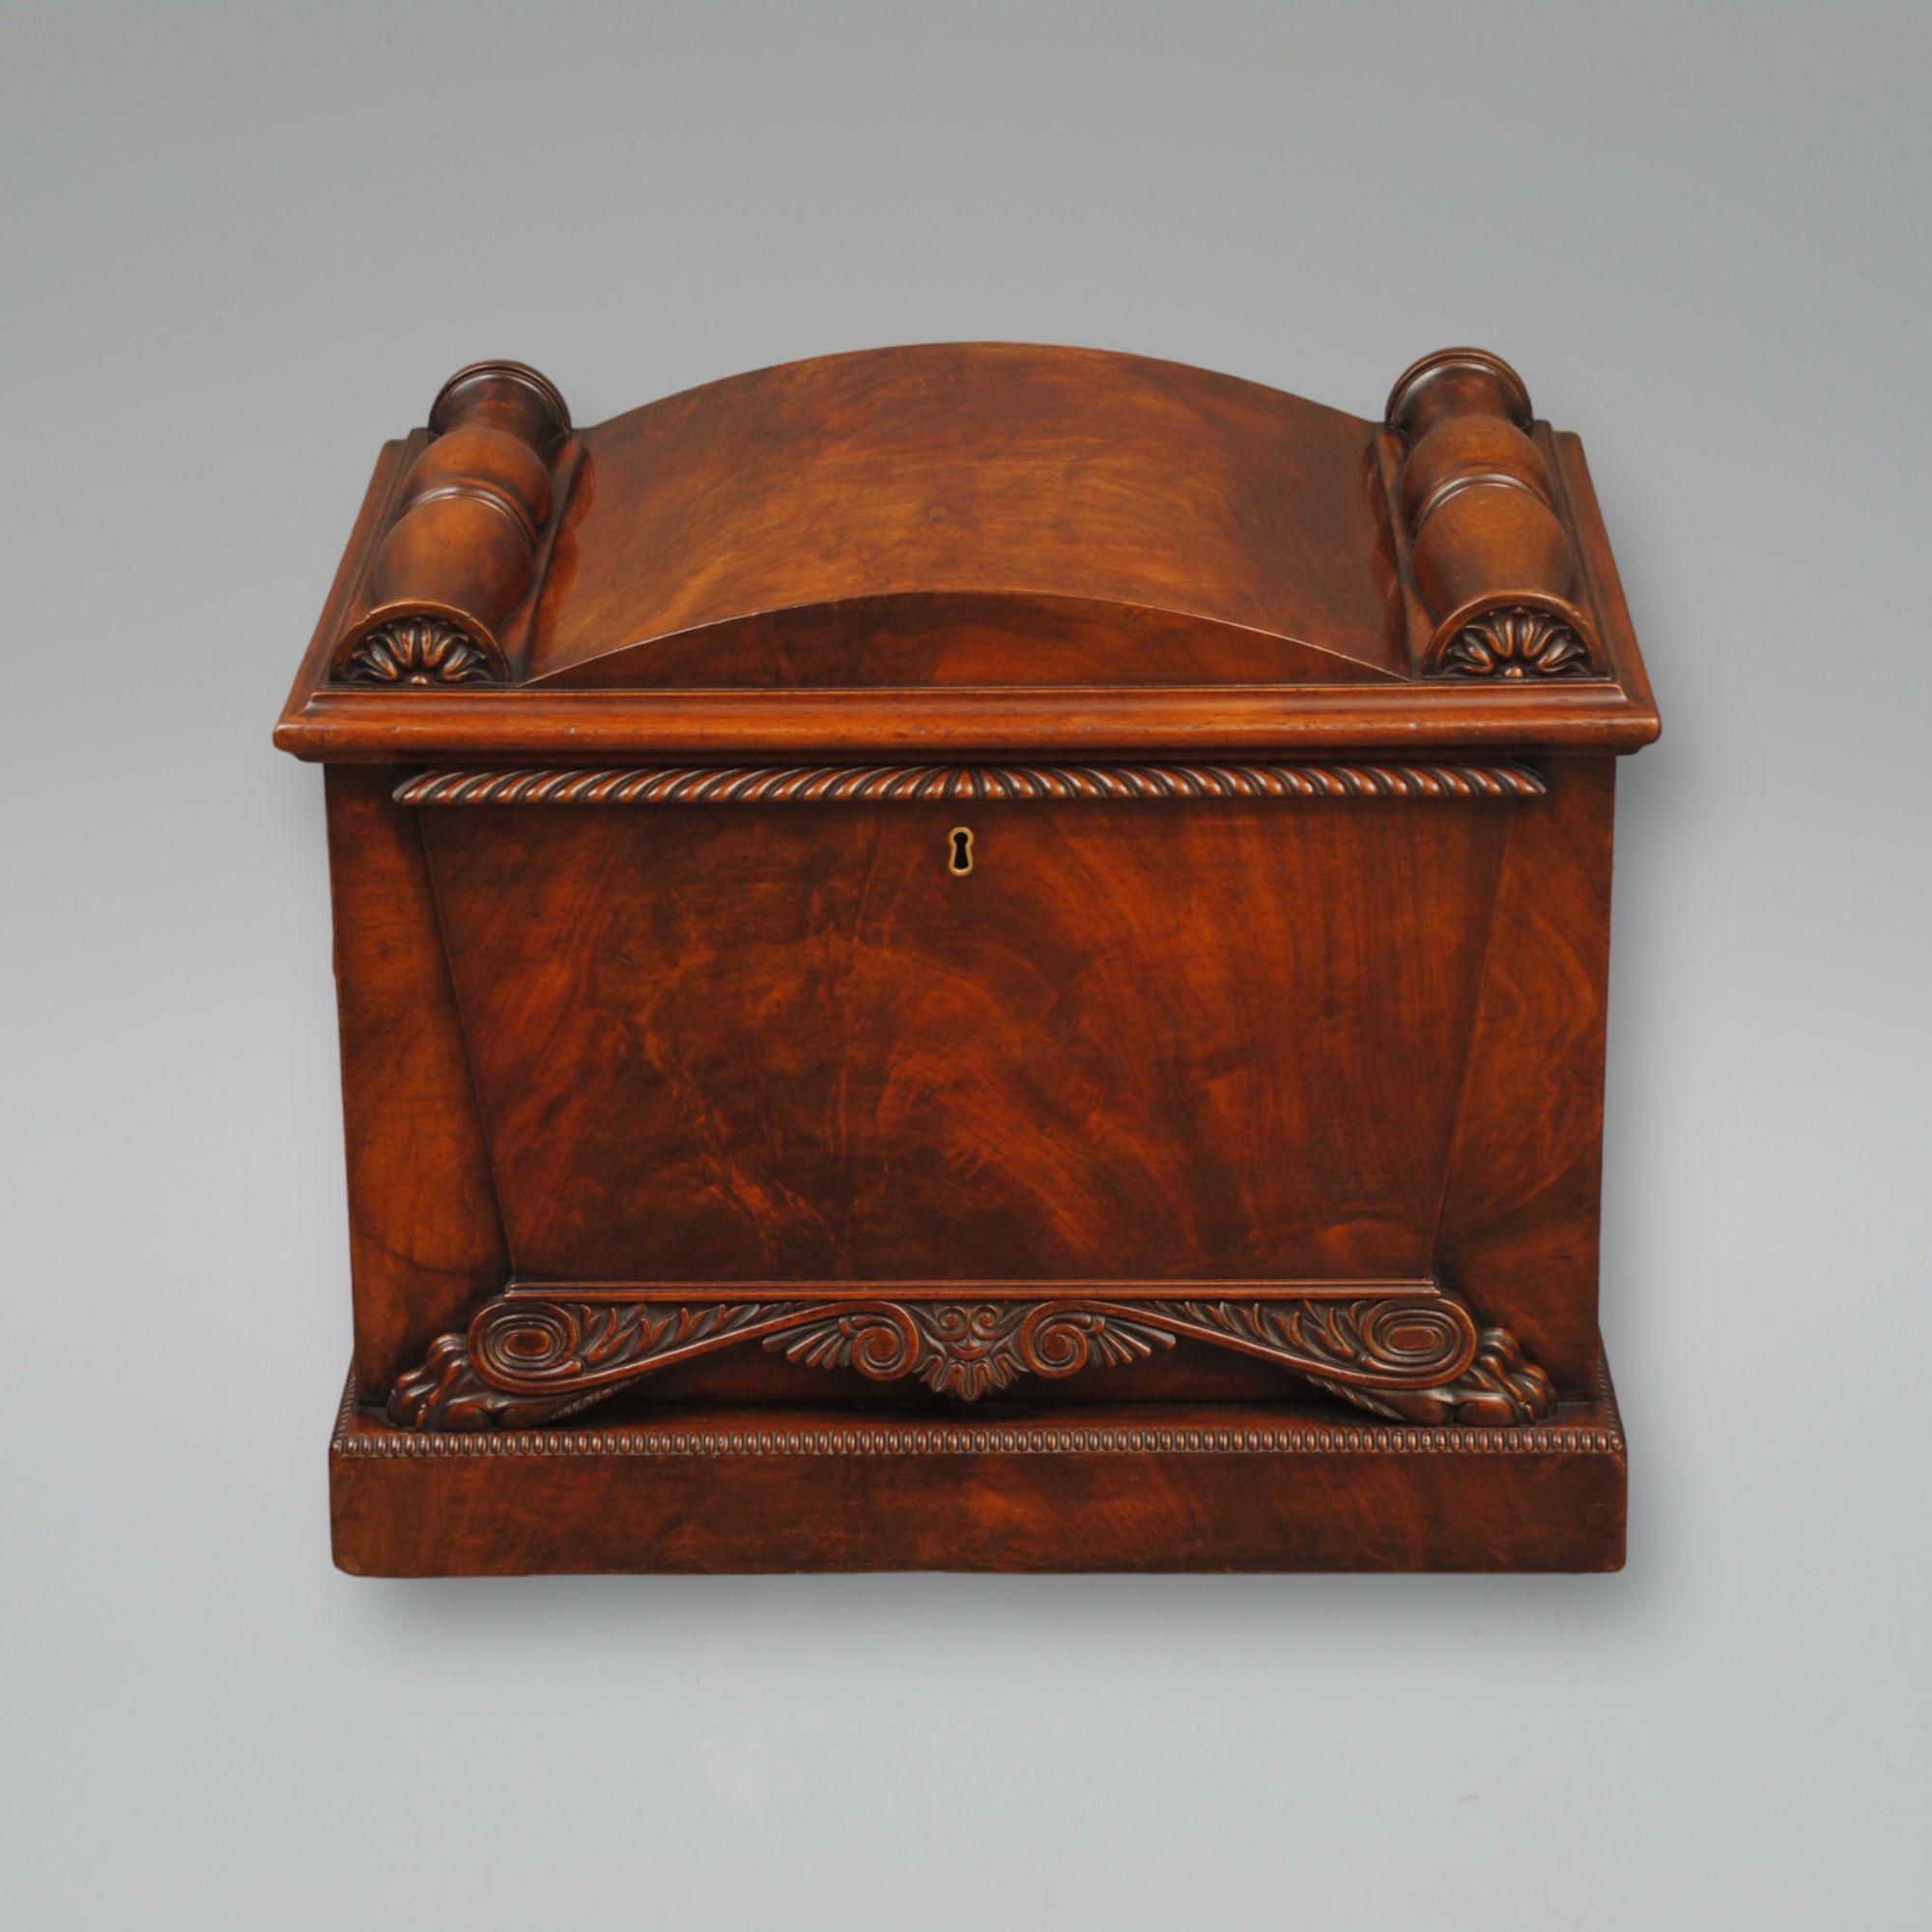 A good carved example of a Regency mahogany wine cooler of sarcophagus design with carved paw feet and flame veneers, in the manner of Thomas Hope.
Circa 1825